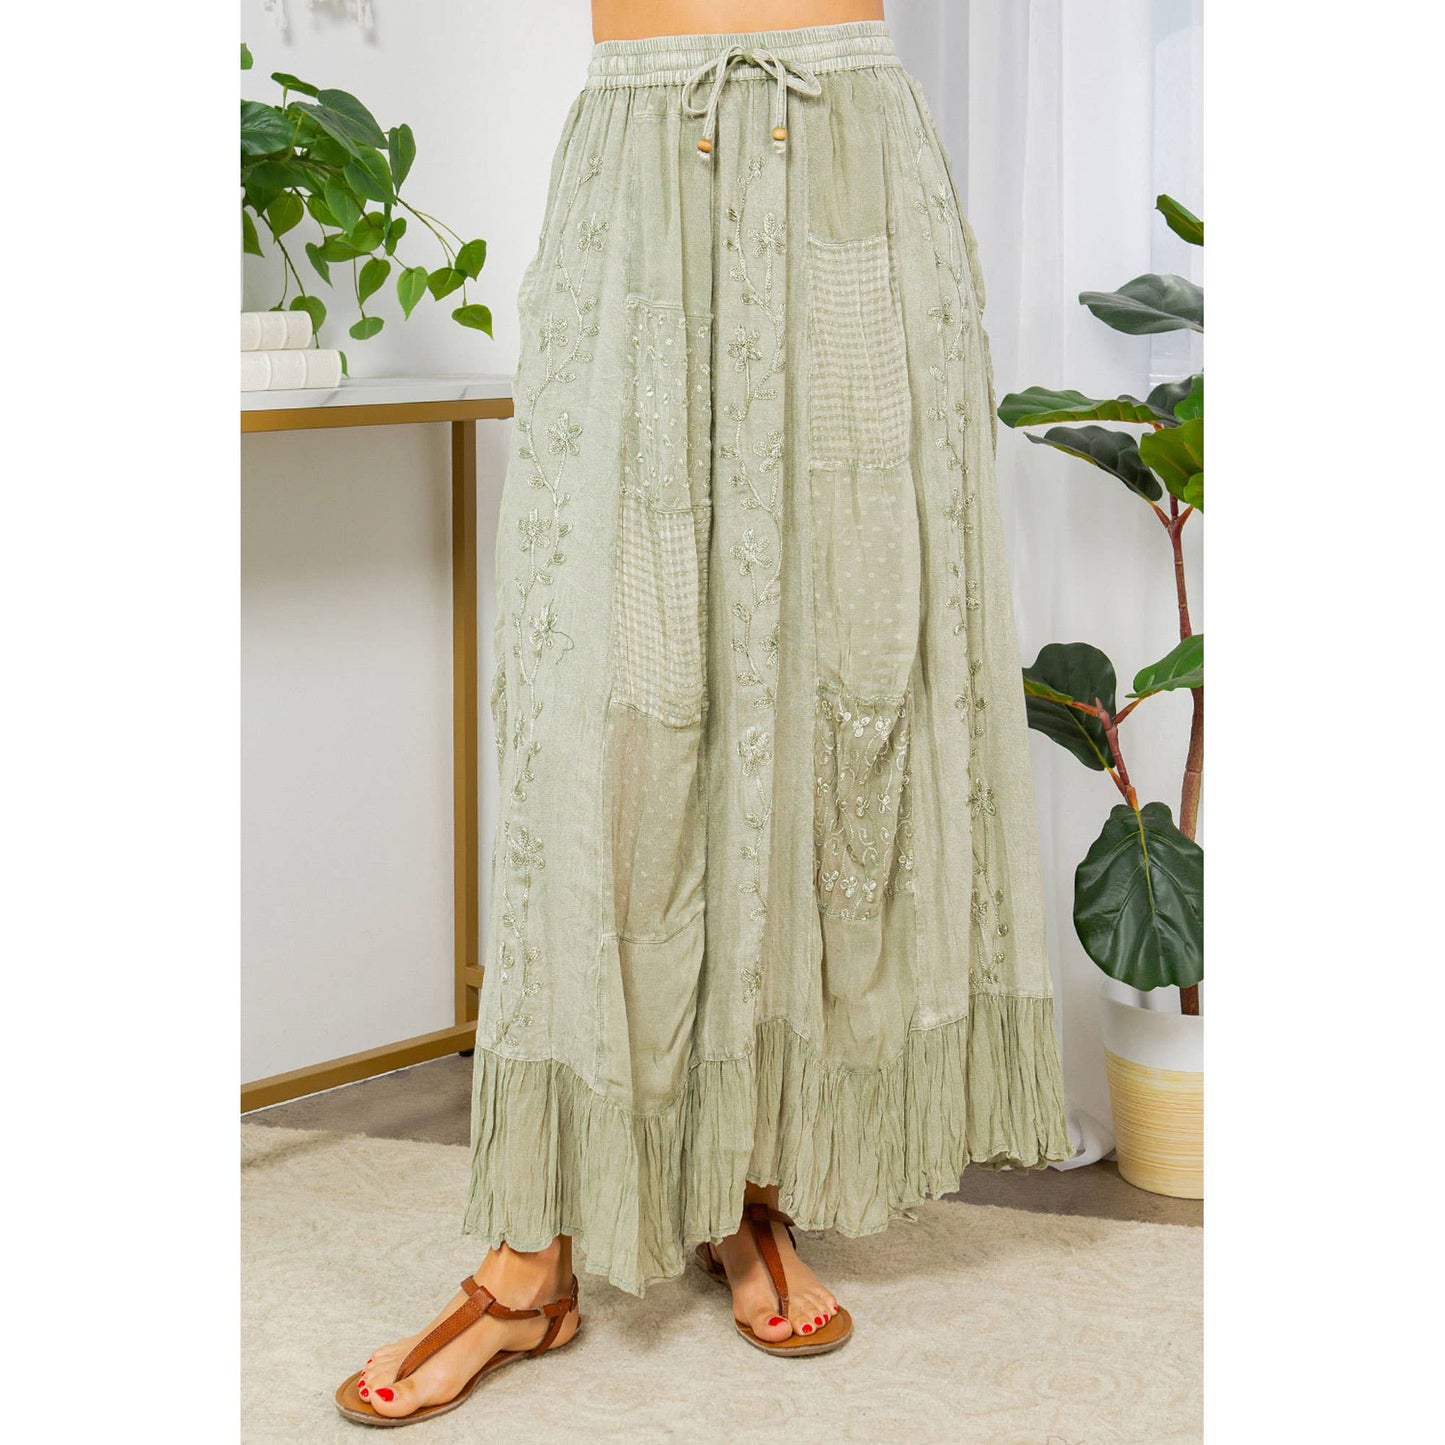 Young Threads - Gypsy Rhapsody: Textured Tiered Skirt With Aari Embroidery: Olive